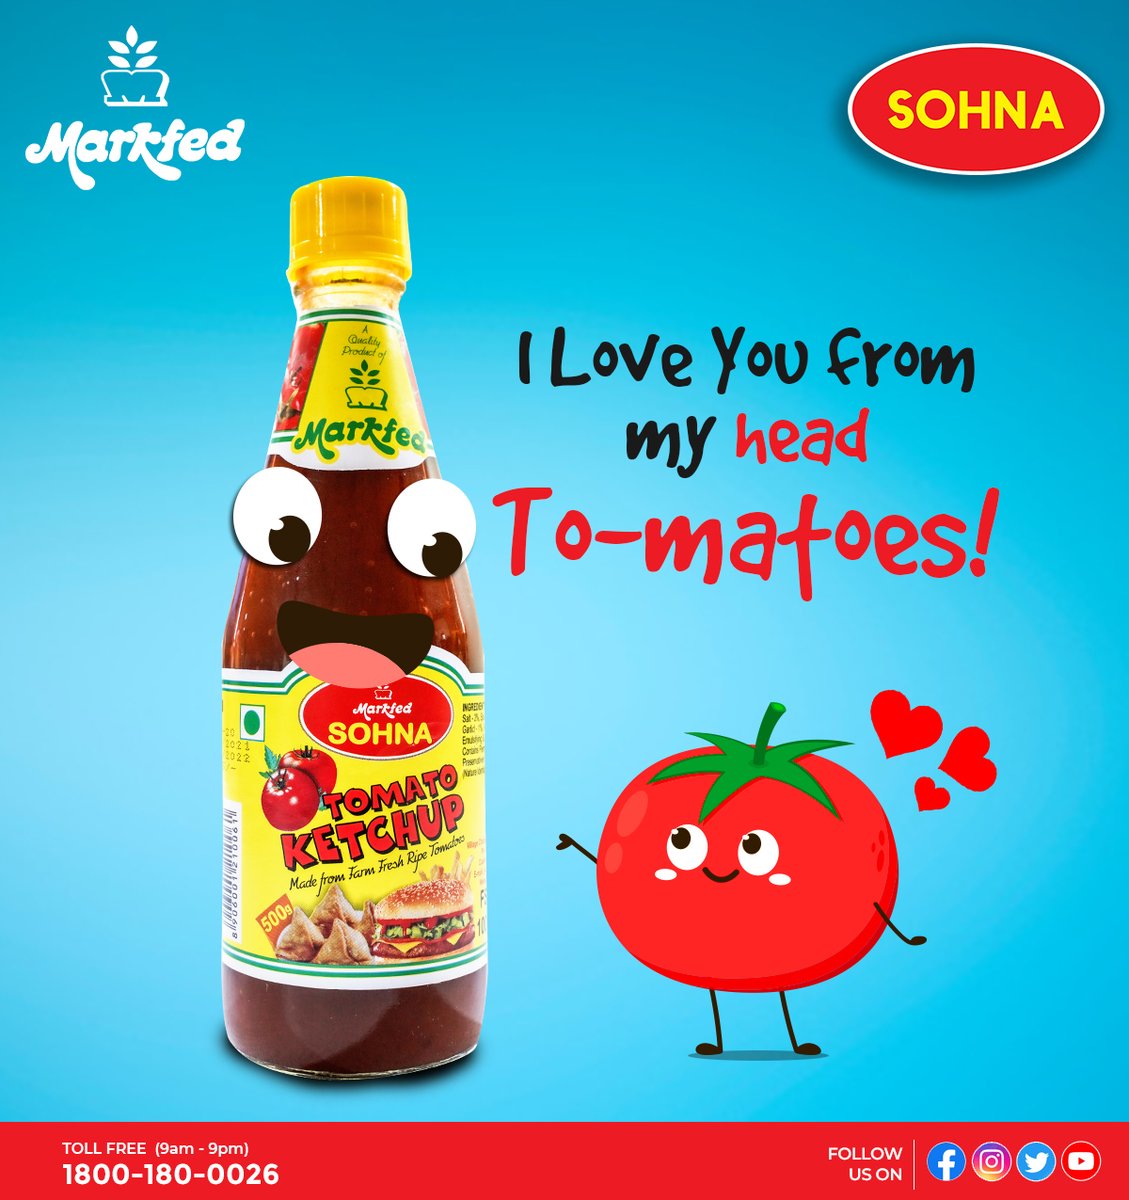 Pair your favorite snacks with the tangy goodness of SOHNA Tomato Ketchup. 🍅 Elevate your snacking experience! 🍟🍔 To purchase Markfed SOHNA Products, please check the link given: bit.ly/3IOvqoo #SOHNA #SOHNAMarkfed #Punjab #tomato #tomatoketchup #snacksmart